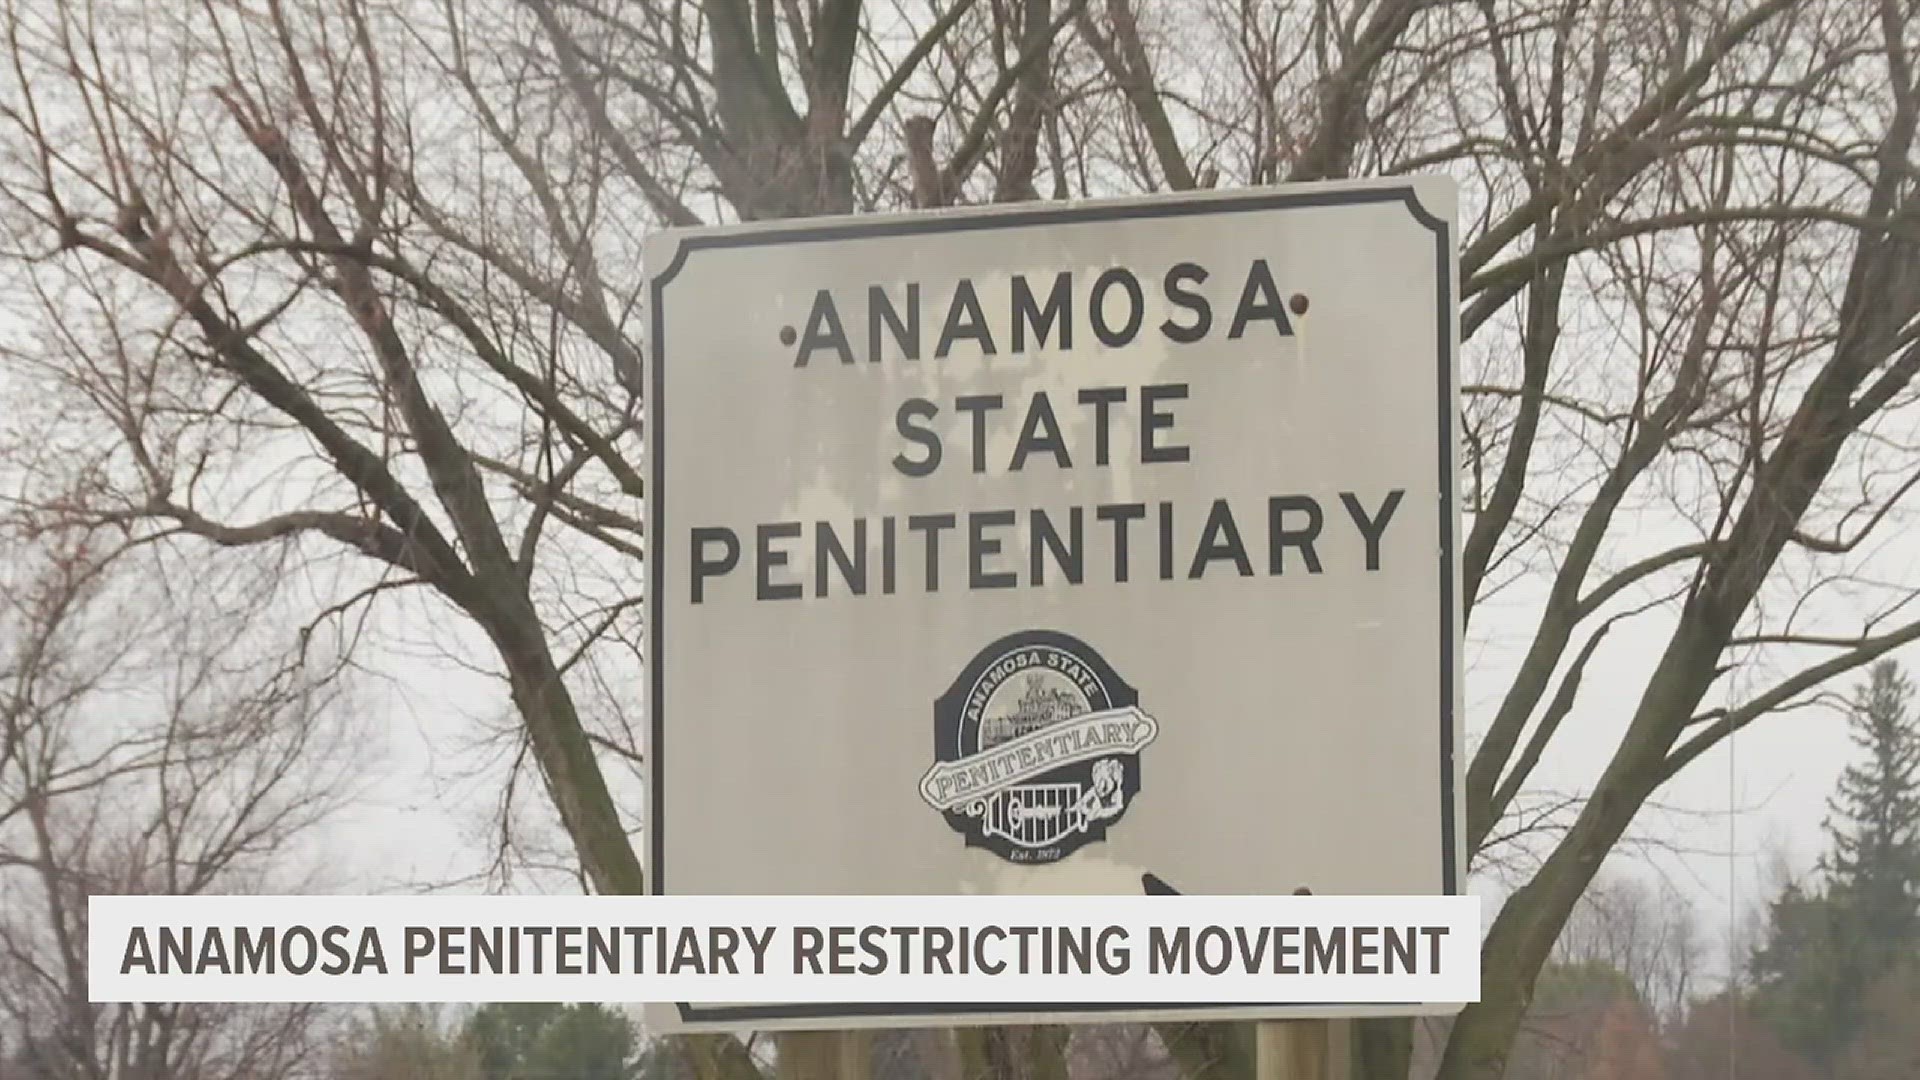 The Anamosa State Penitentiary is now under "restricted movement" after two inmates were found unresponsive in their cells Sunday.